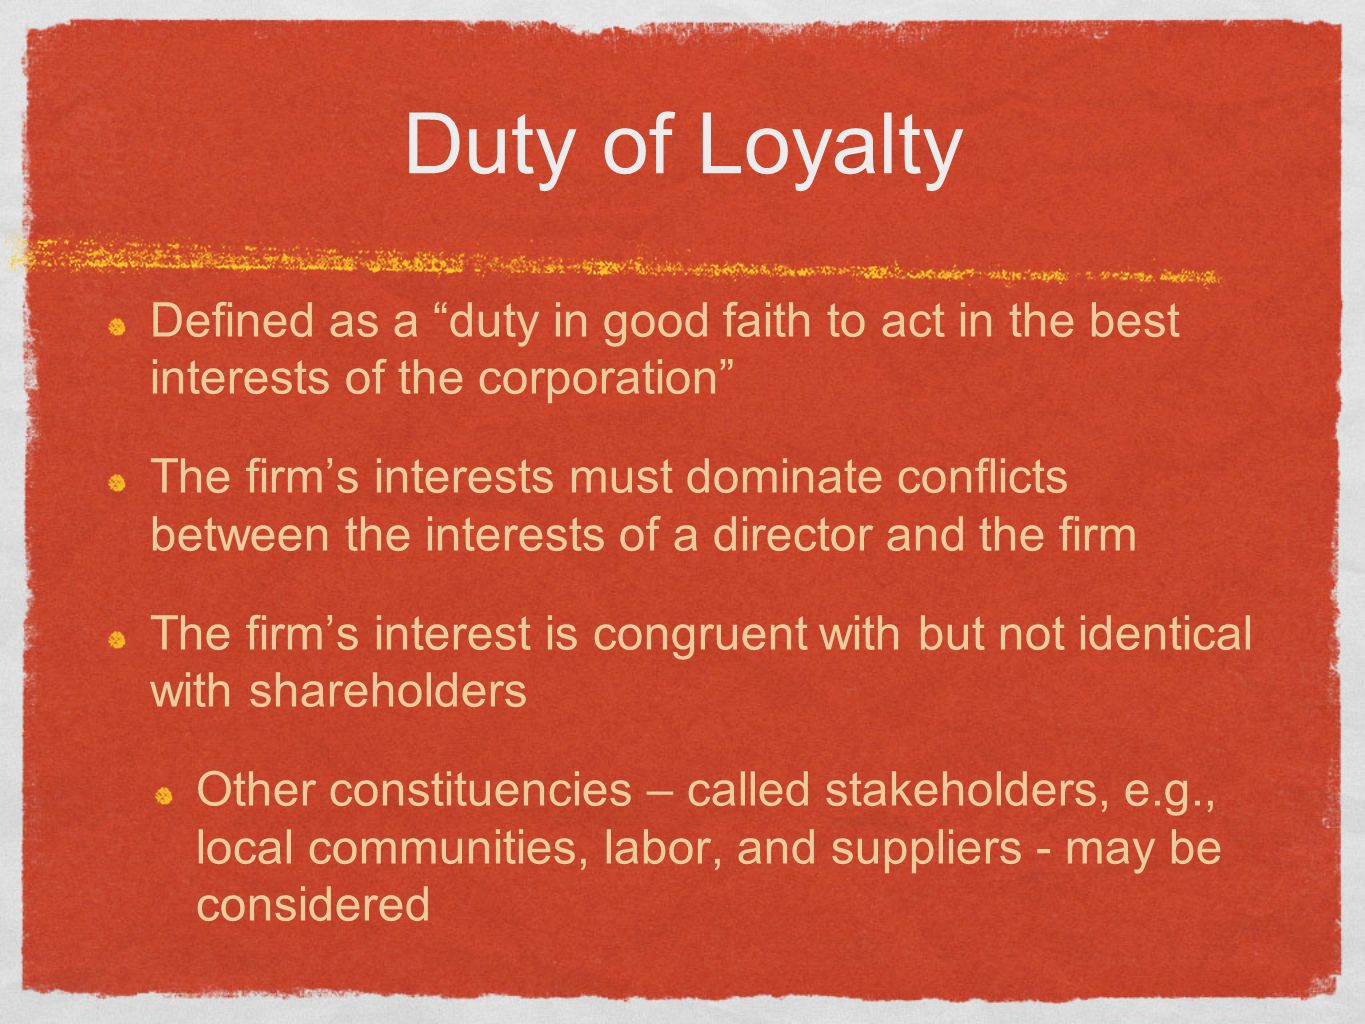 Duty of Loyalty Defined as a duty in good faith to act in the best interests of the corporation The firm’s interests must dominate conflicts between the interests of a director and the firm The firm’s interest is congruent with but not identical with shareholders Other constituencies – called stakeholders, e.g., local communities, labor, and suppliers - may be considered